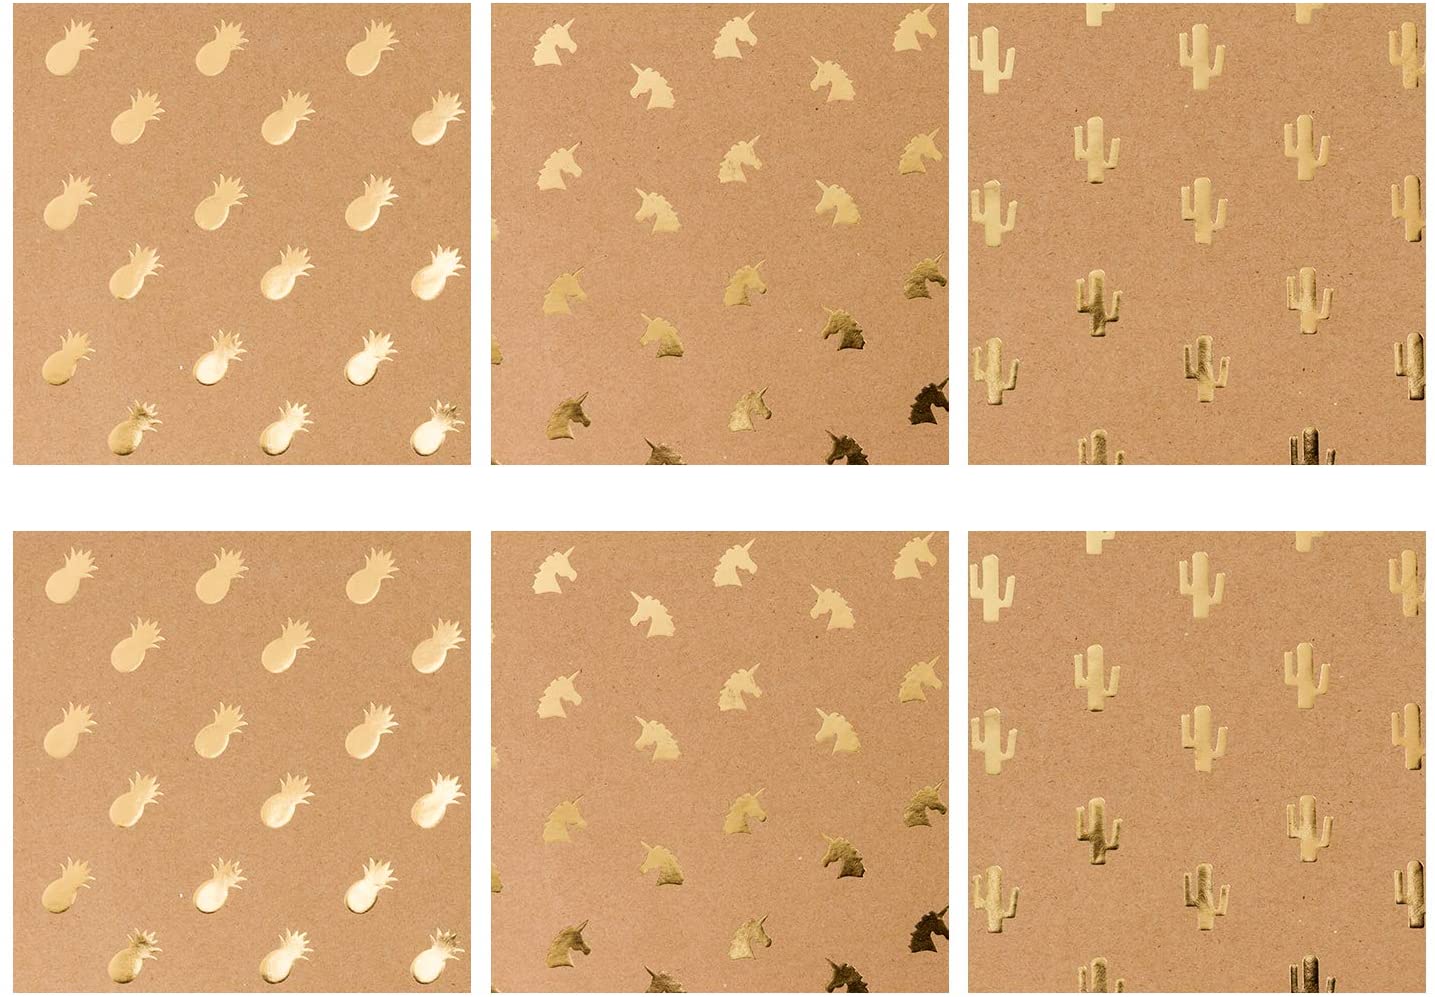 WRAPLA Kraft Wrapping Paper Gold Foil Unicorn Pineapple Cactus Shiny Kraft Paper for Birthday, Holiday, Wedding Wrap - 5 Sheets Packed as 1 roll - 50 X 76cm per Sheet